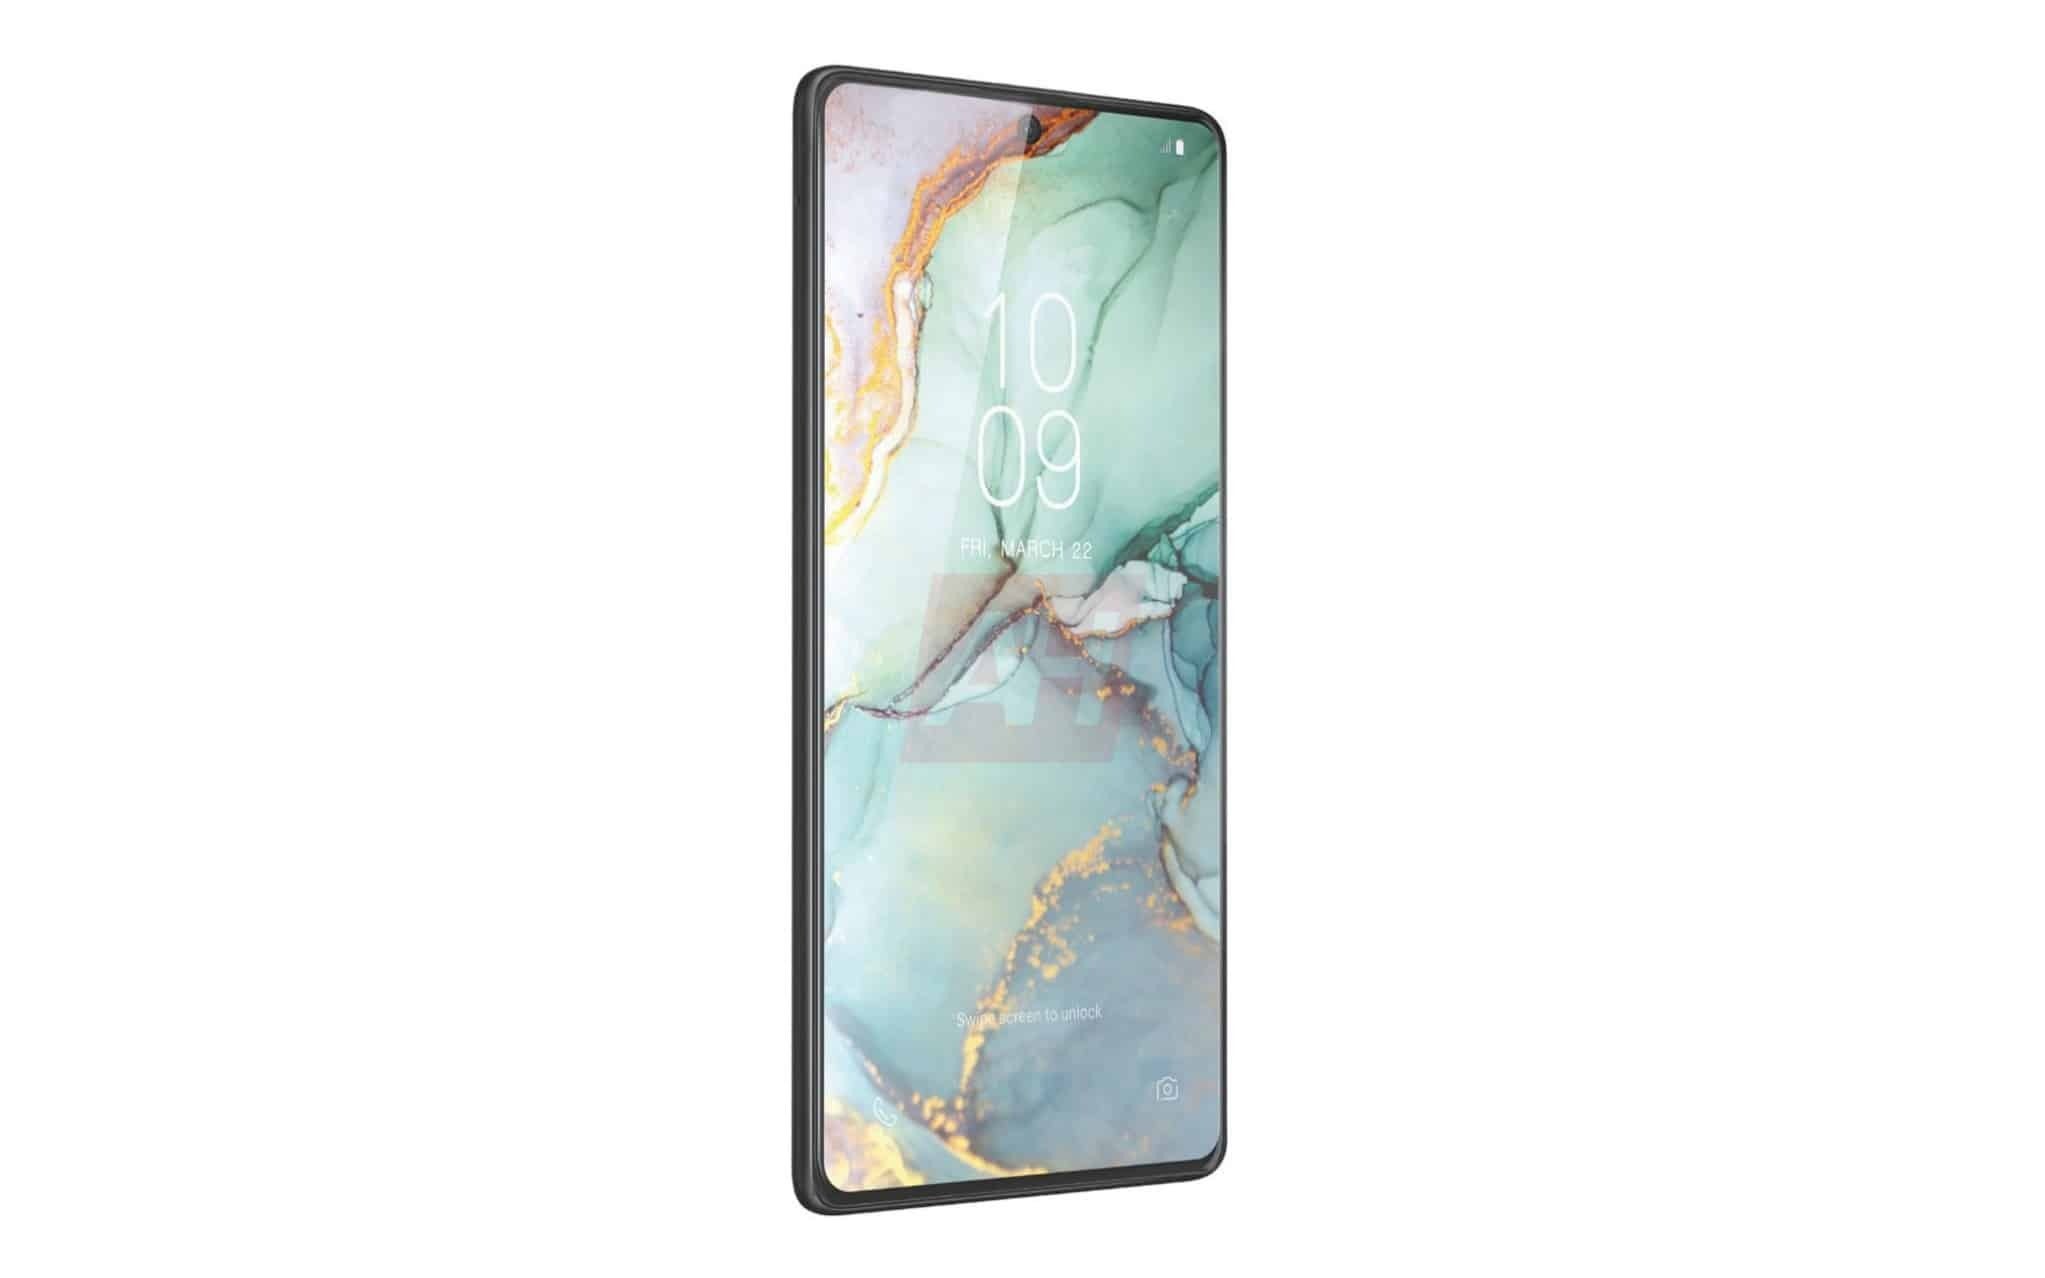 Samsung Galaxy S10 Lite - These renders allegedly show Samsung&#039;s Galaxy S10 Lite and Note 10 Lite